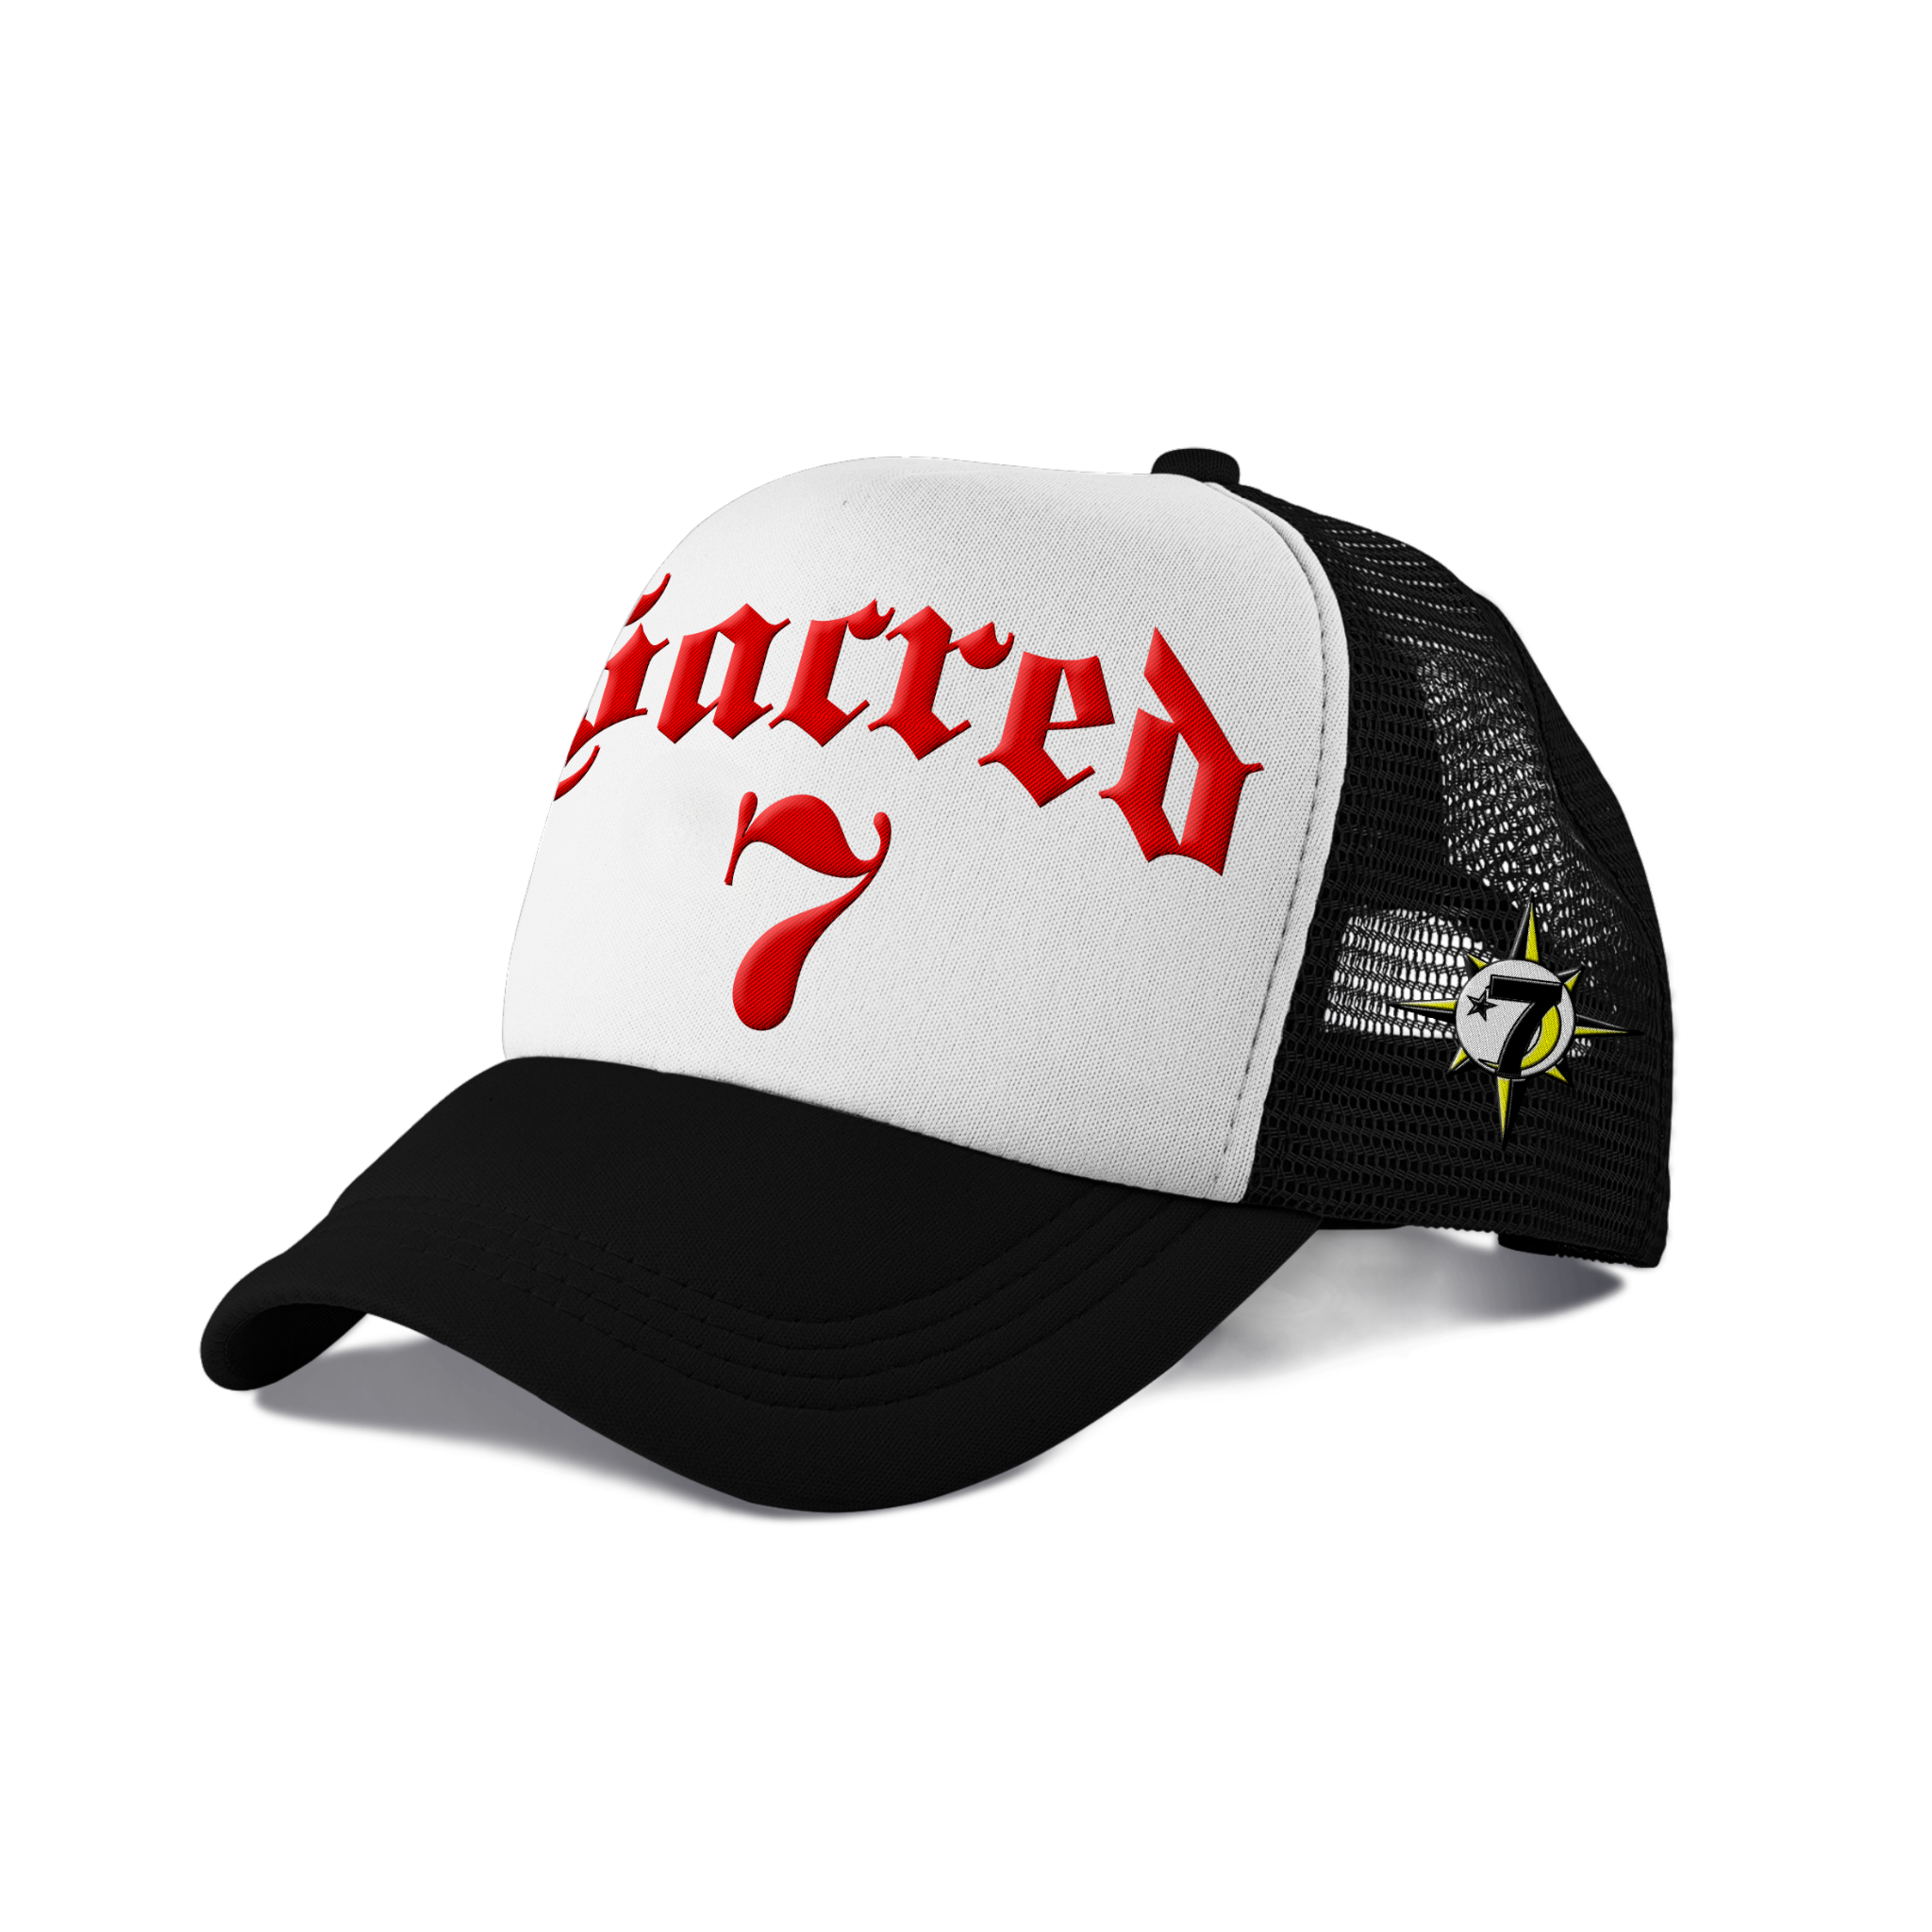 Sacred 7 Embroidered Trucker - Black & White W/ Red